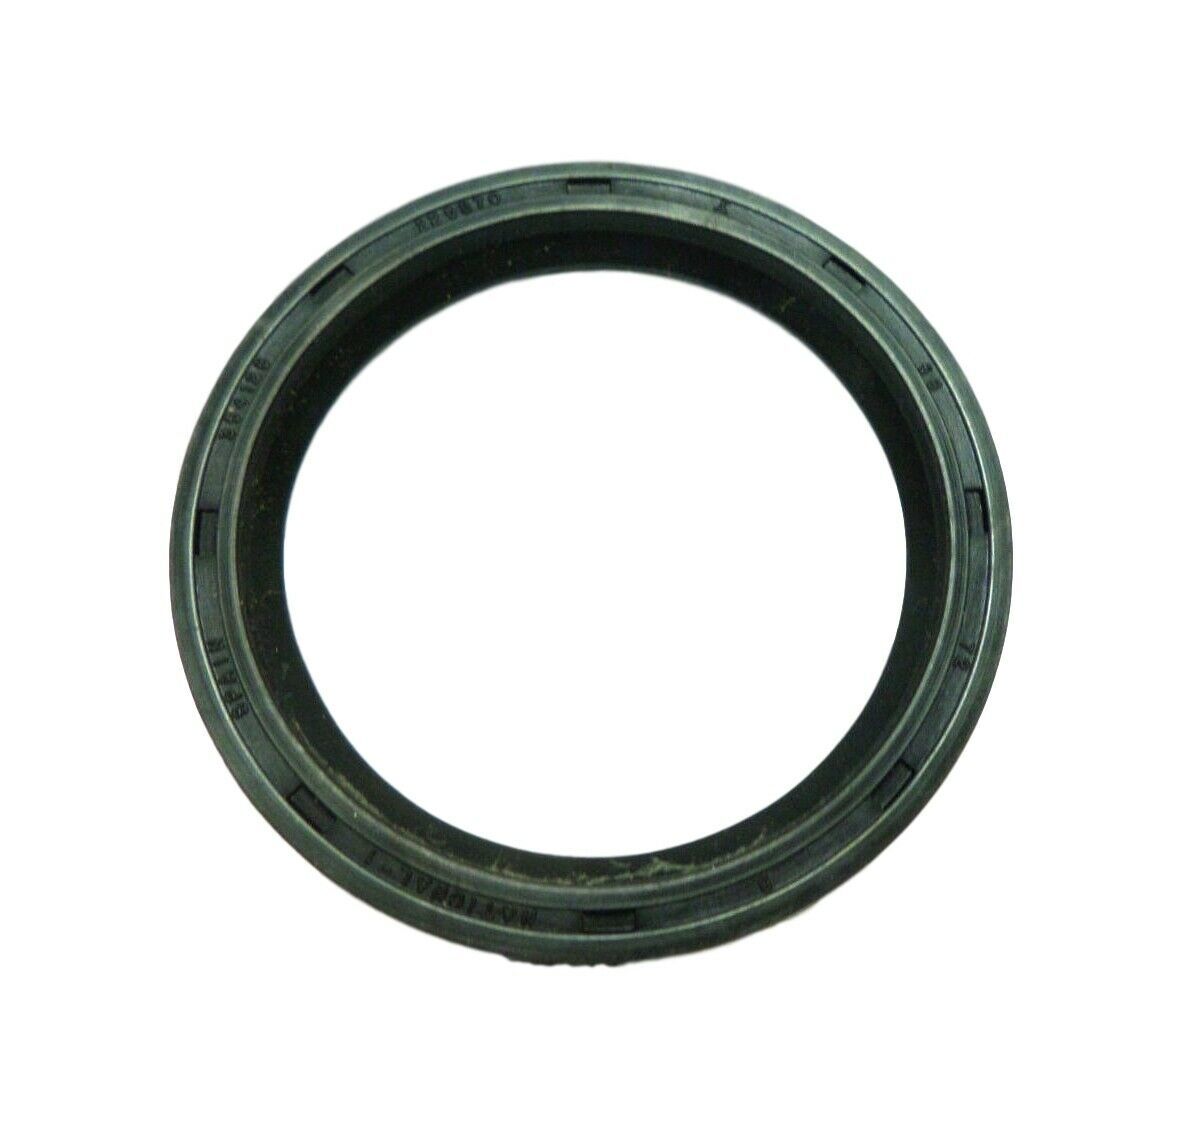 Primary image for Federal Mogul 225870 National Oil Seals Wheel Seal